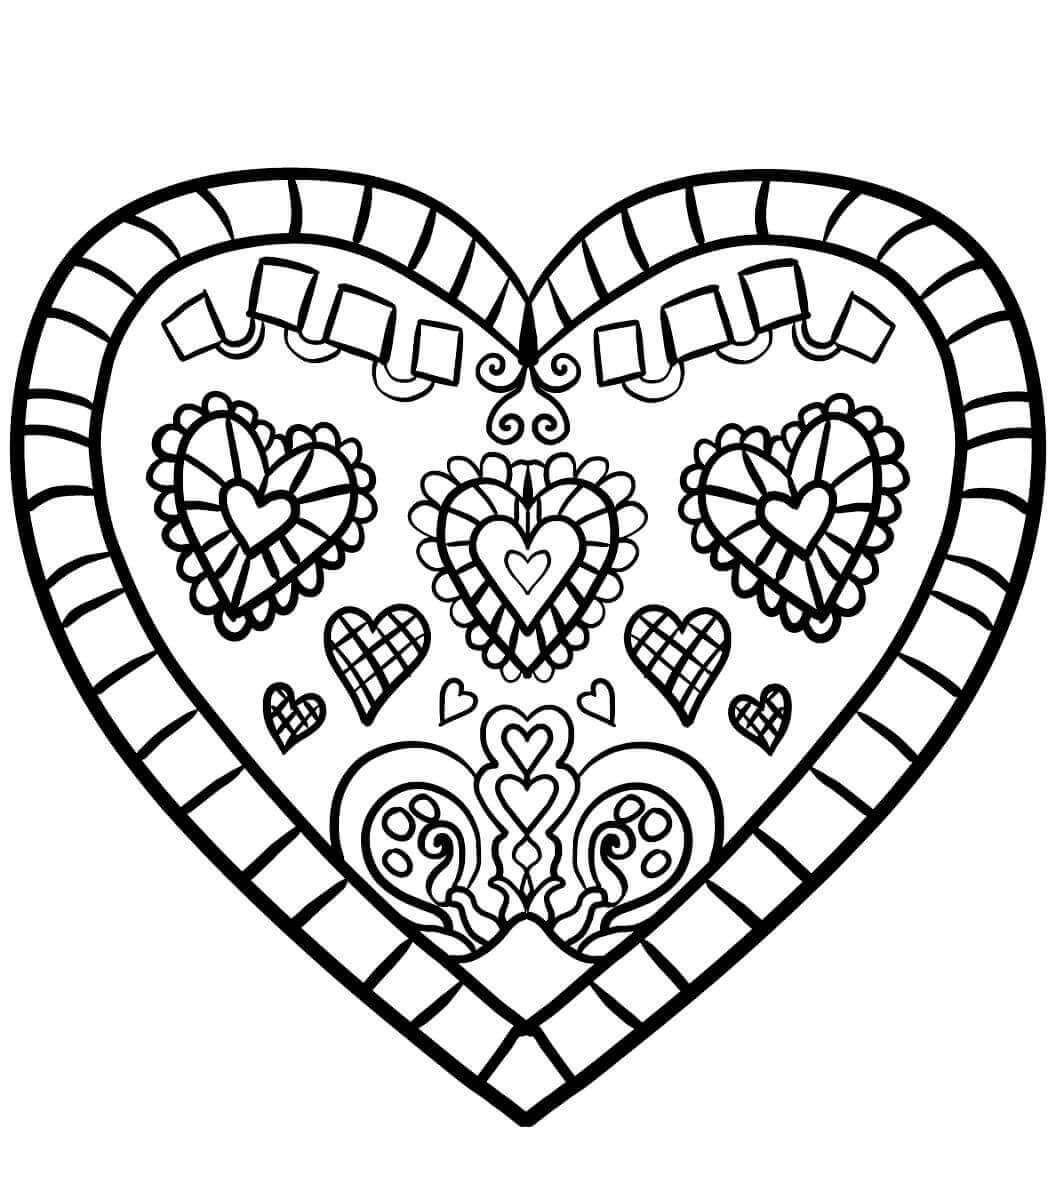 Heart Printable Coloring Pages
 35 Free Printable Heart Coloring Pages